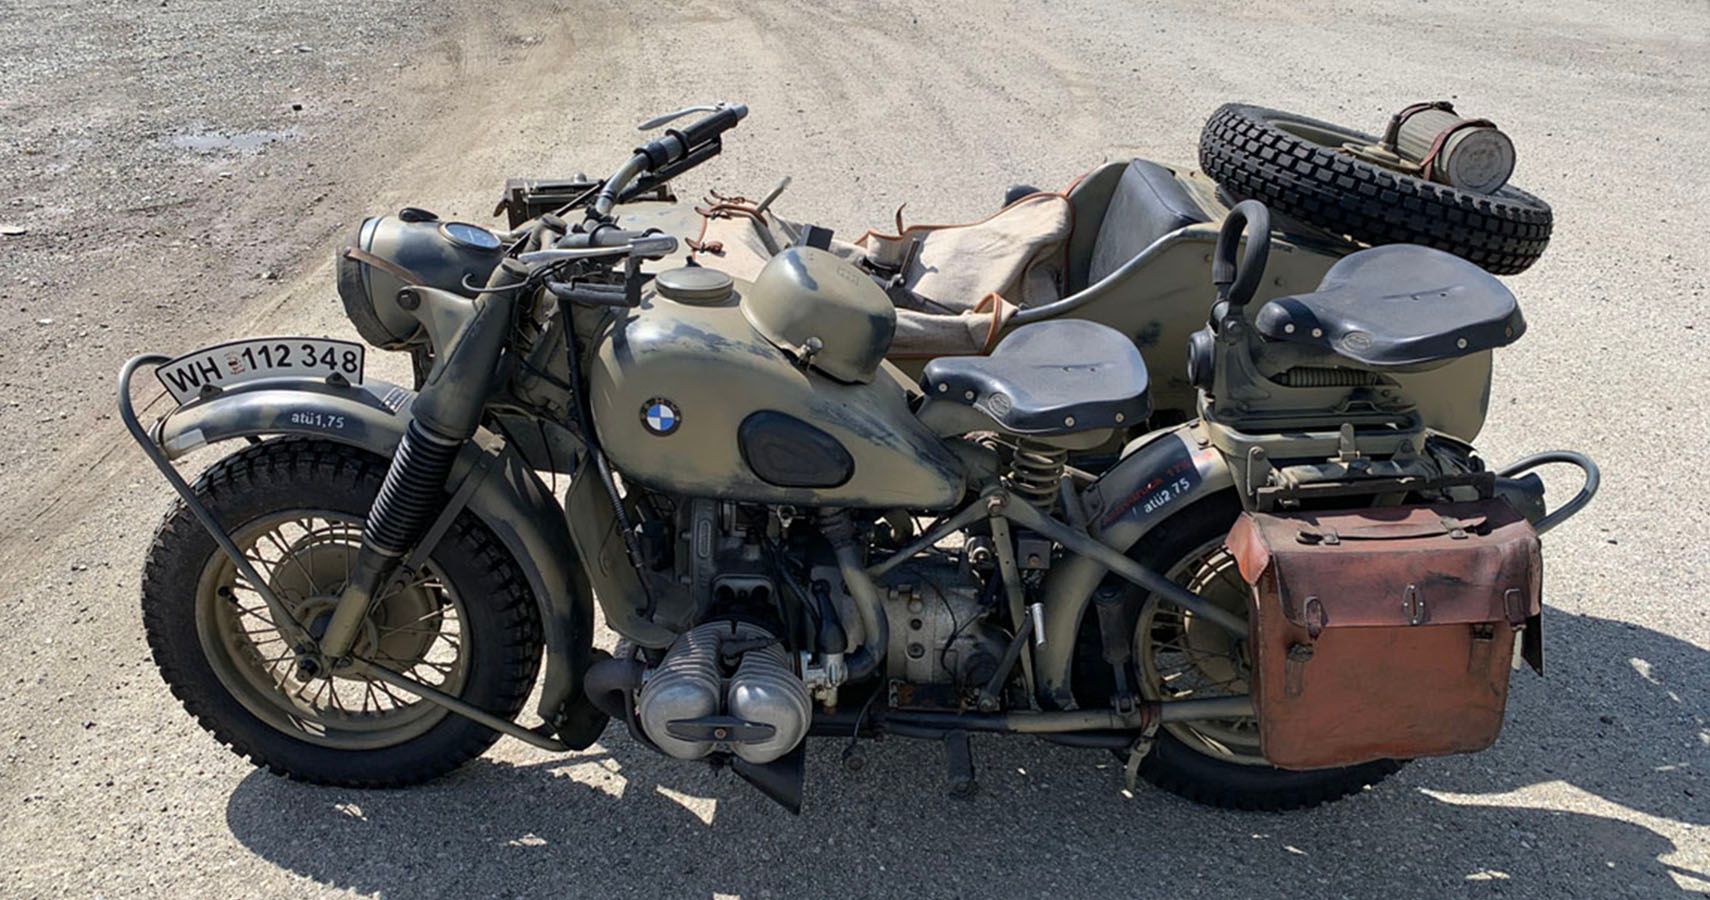 A Detailed Look At Brad Pitt's WWII Motorcycle